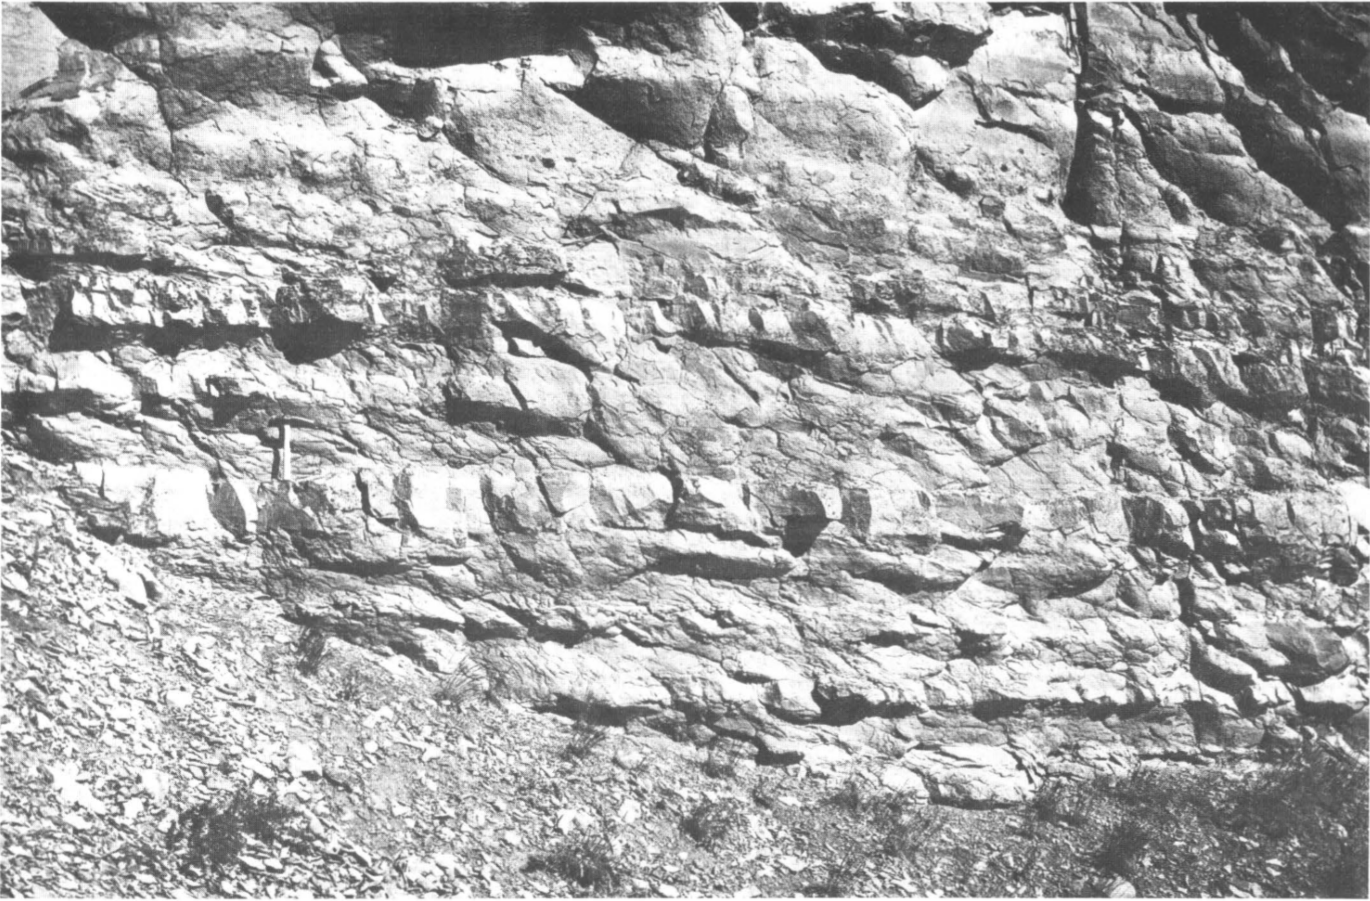 old black and white photo of rock bands in a cliff